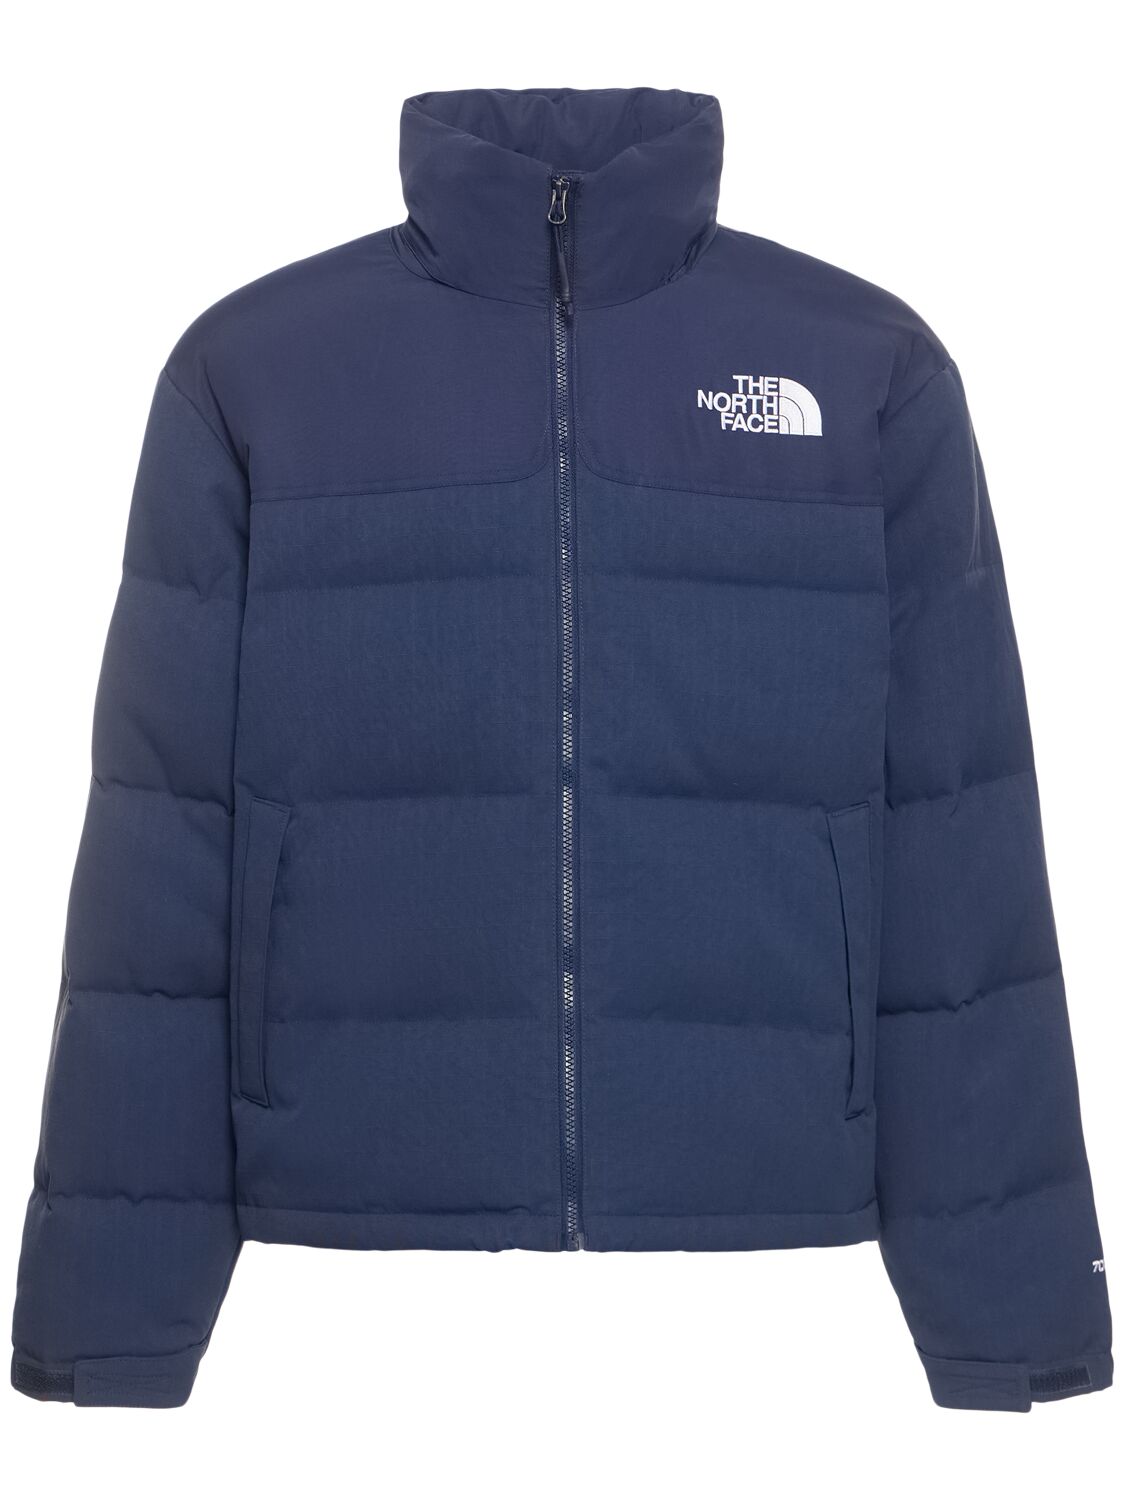 The North Face 92 Crinkle Down Jacket In Summit Navy